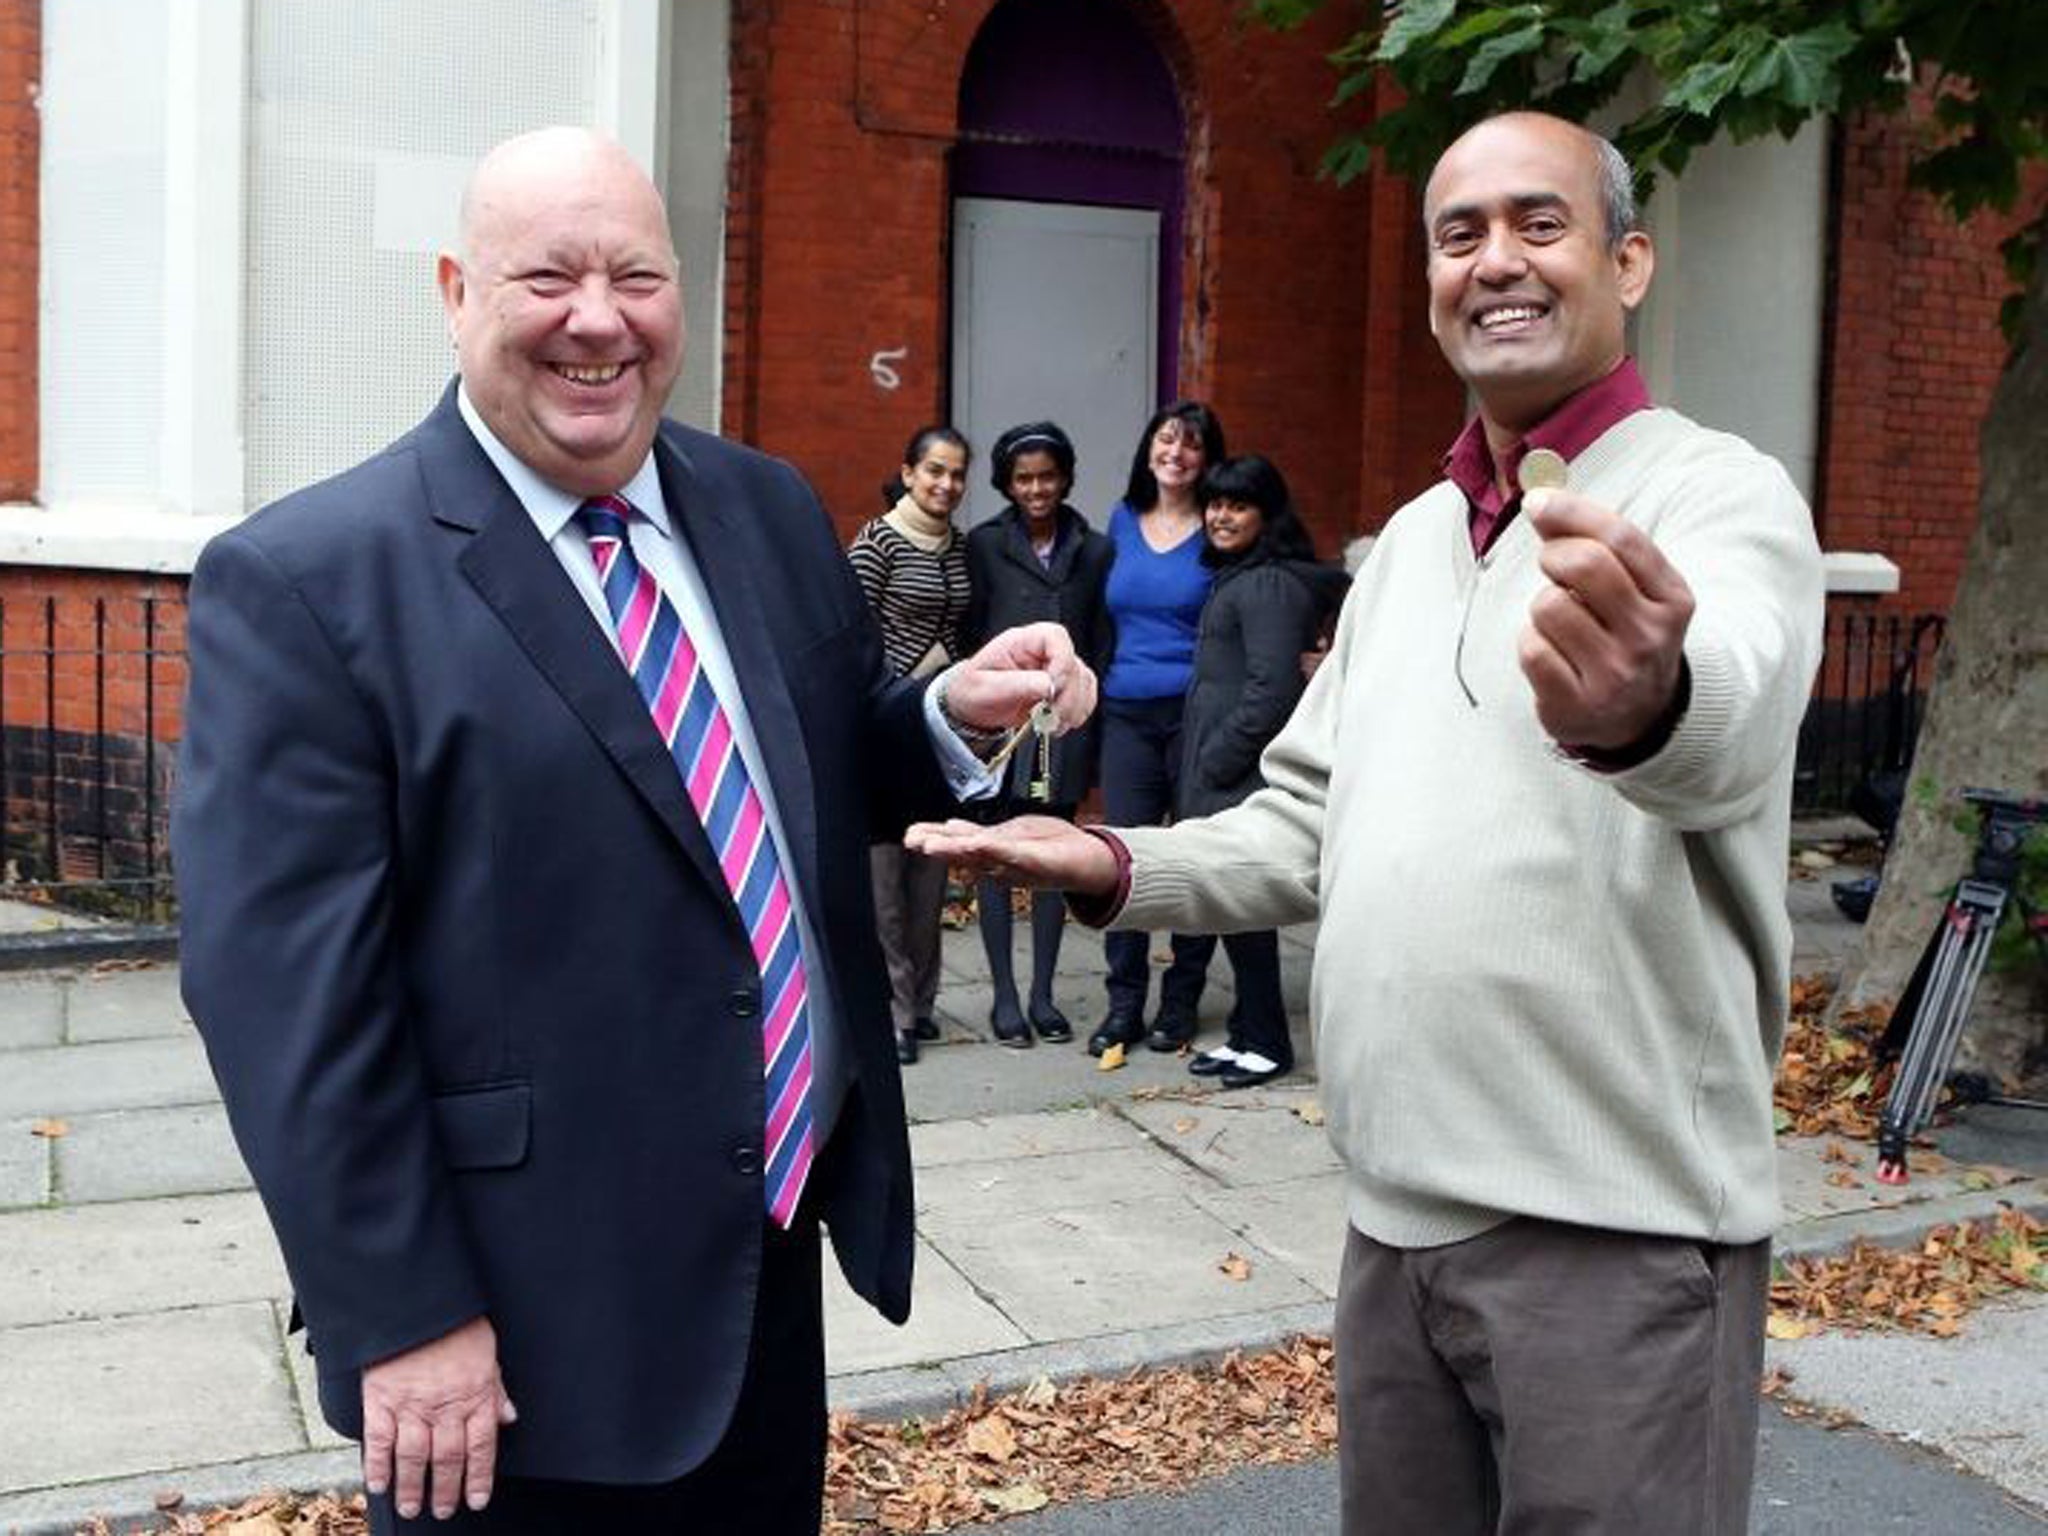 Mr Jayalal Madde and his family has become the first to buy a house from the Council for £1. Liverpool City Council Mayor Joe Anderson handed the keys over to the taxi driver